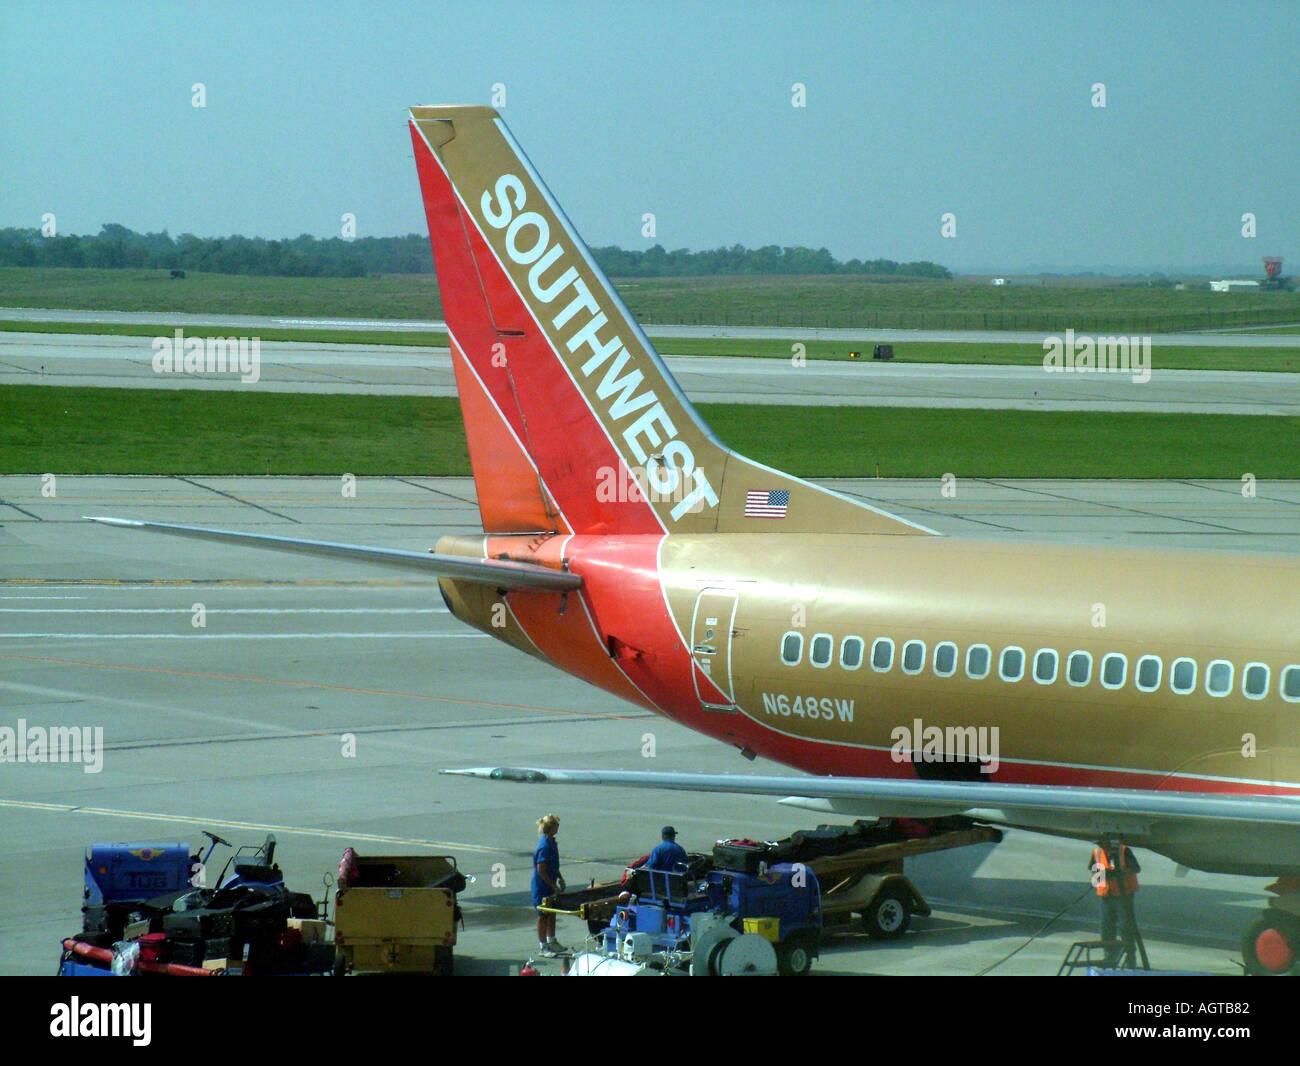 Tail plane of a Southwest Airlines aircraft at Atlanta Hartsfield Jackson International Airport USA Stock Photo